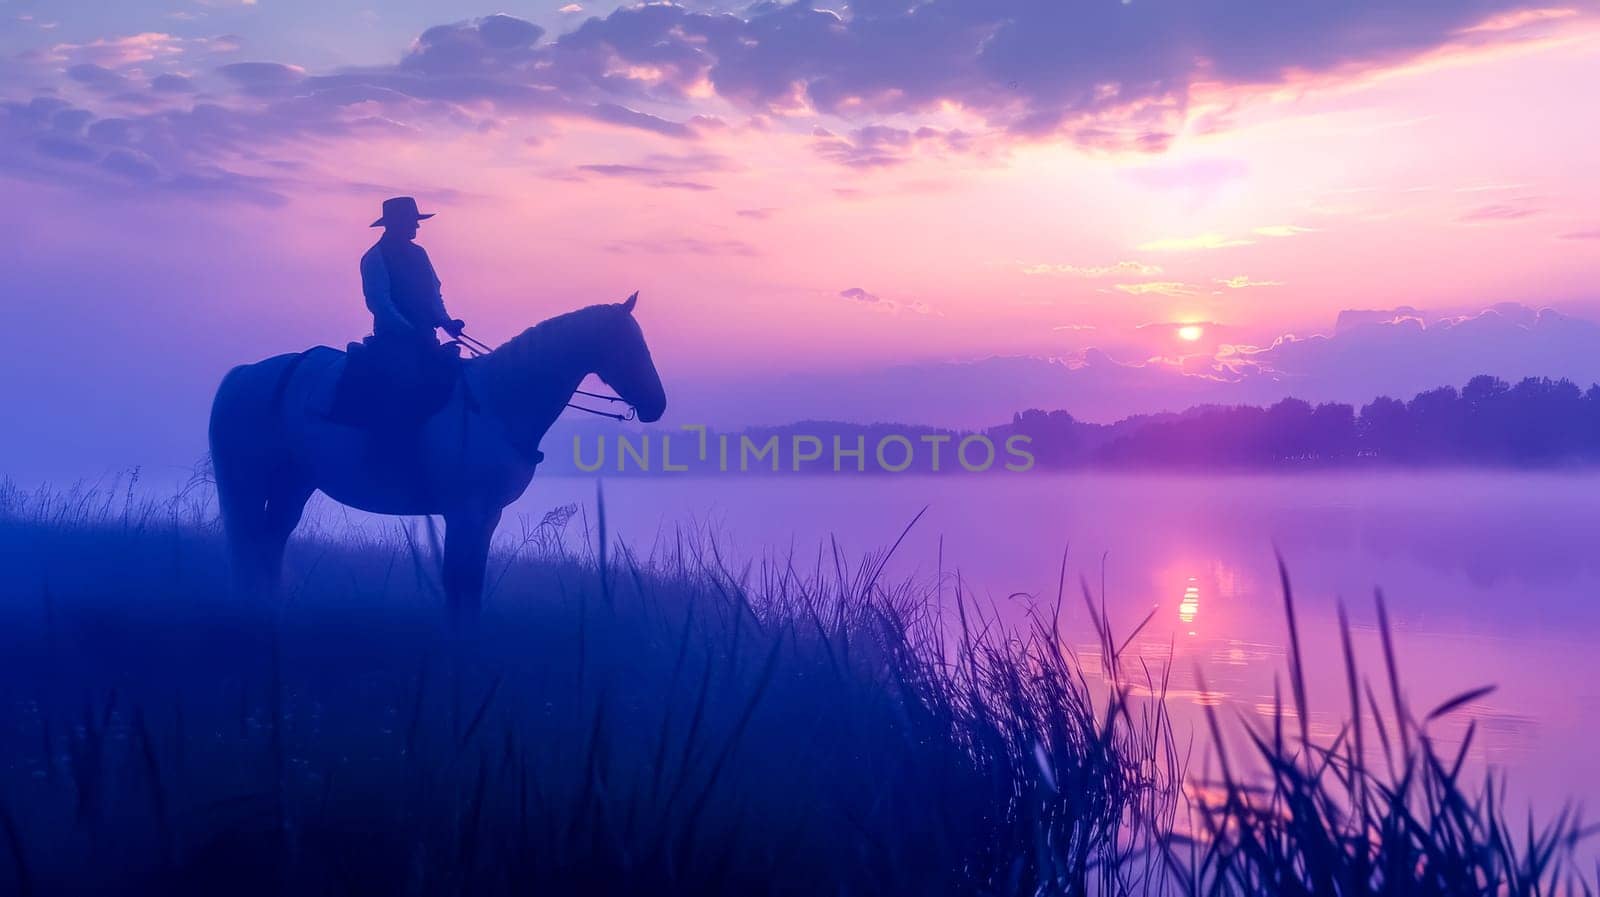 Silhouette of a lone cowboy on horseback at dawn with reflective lake and colorful sky